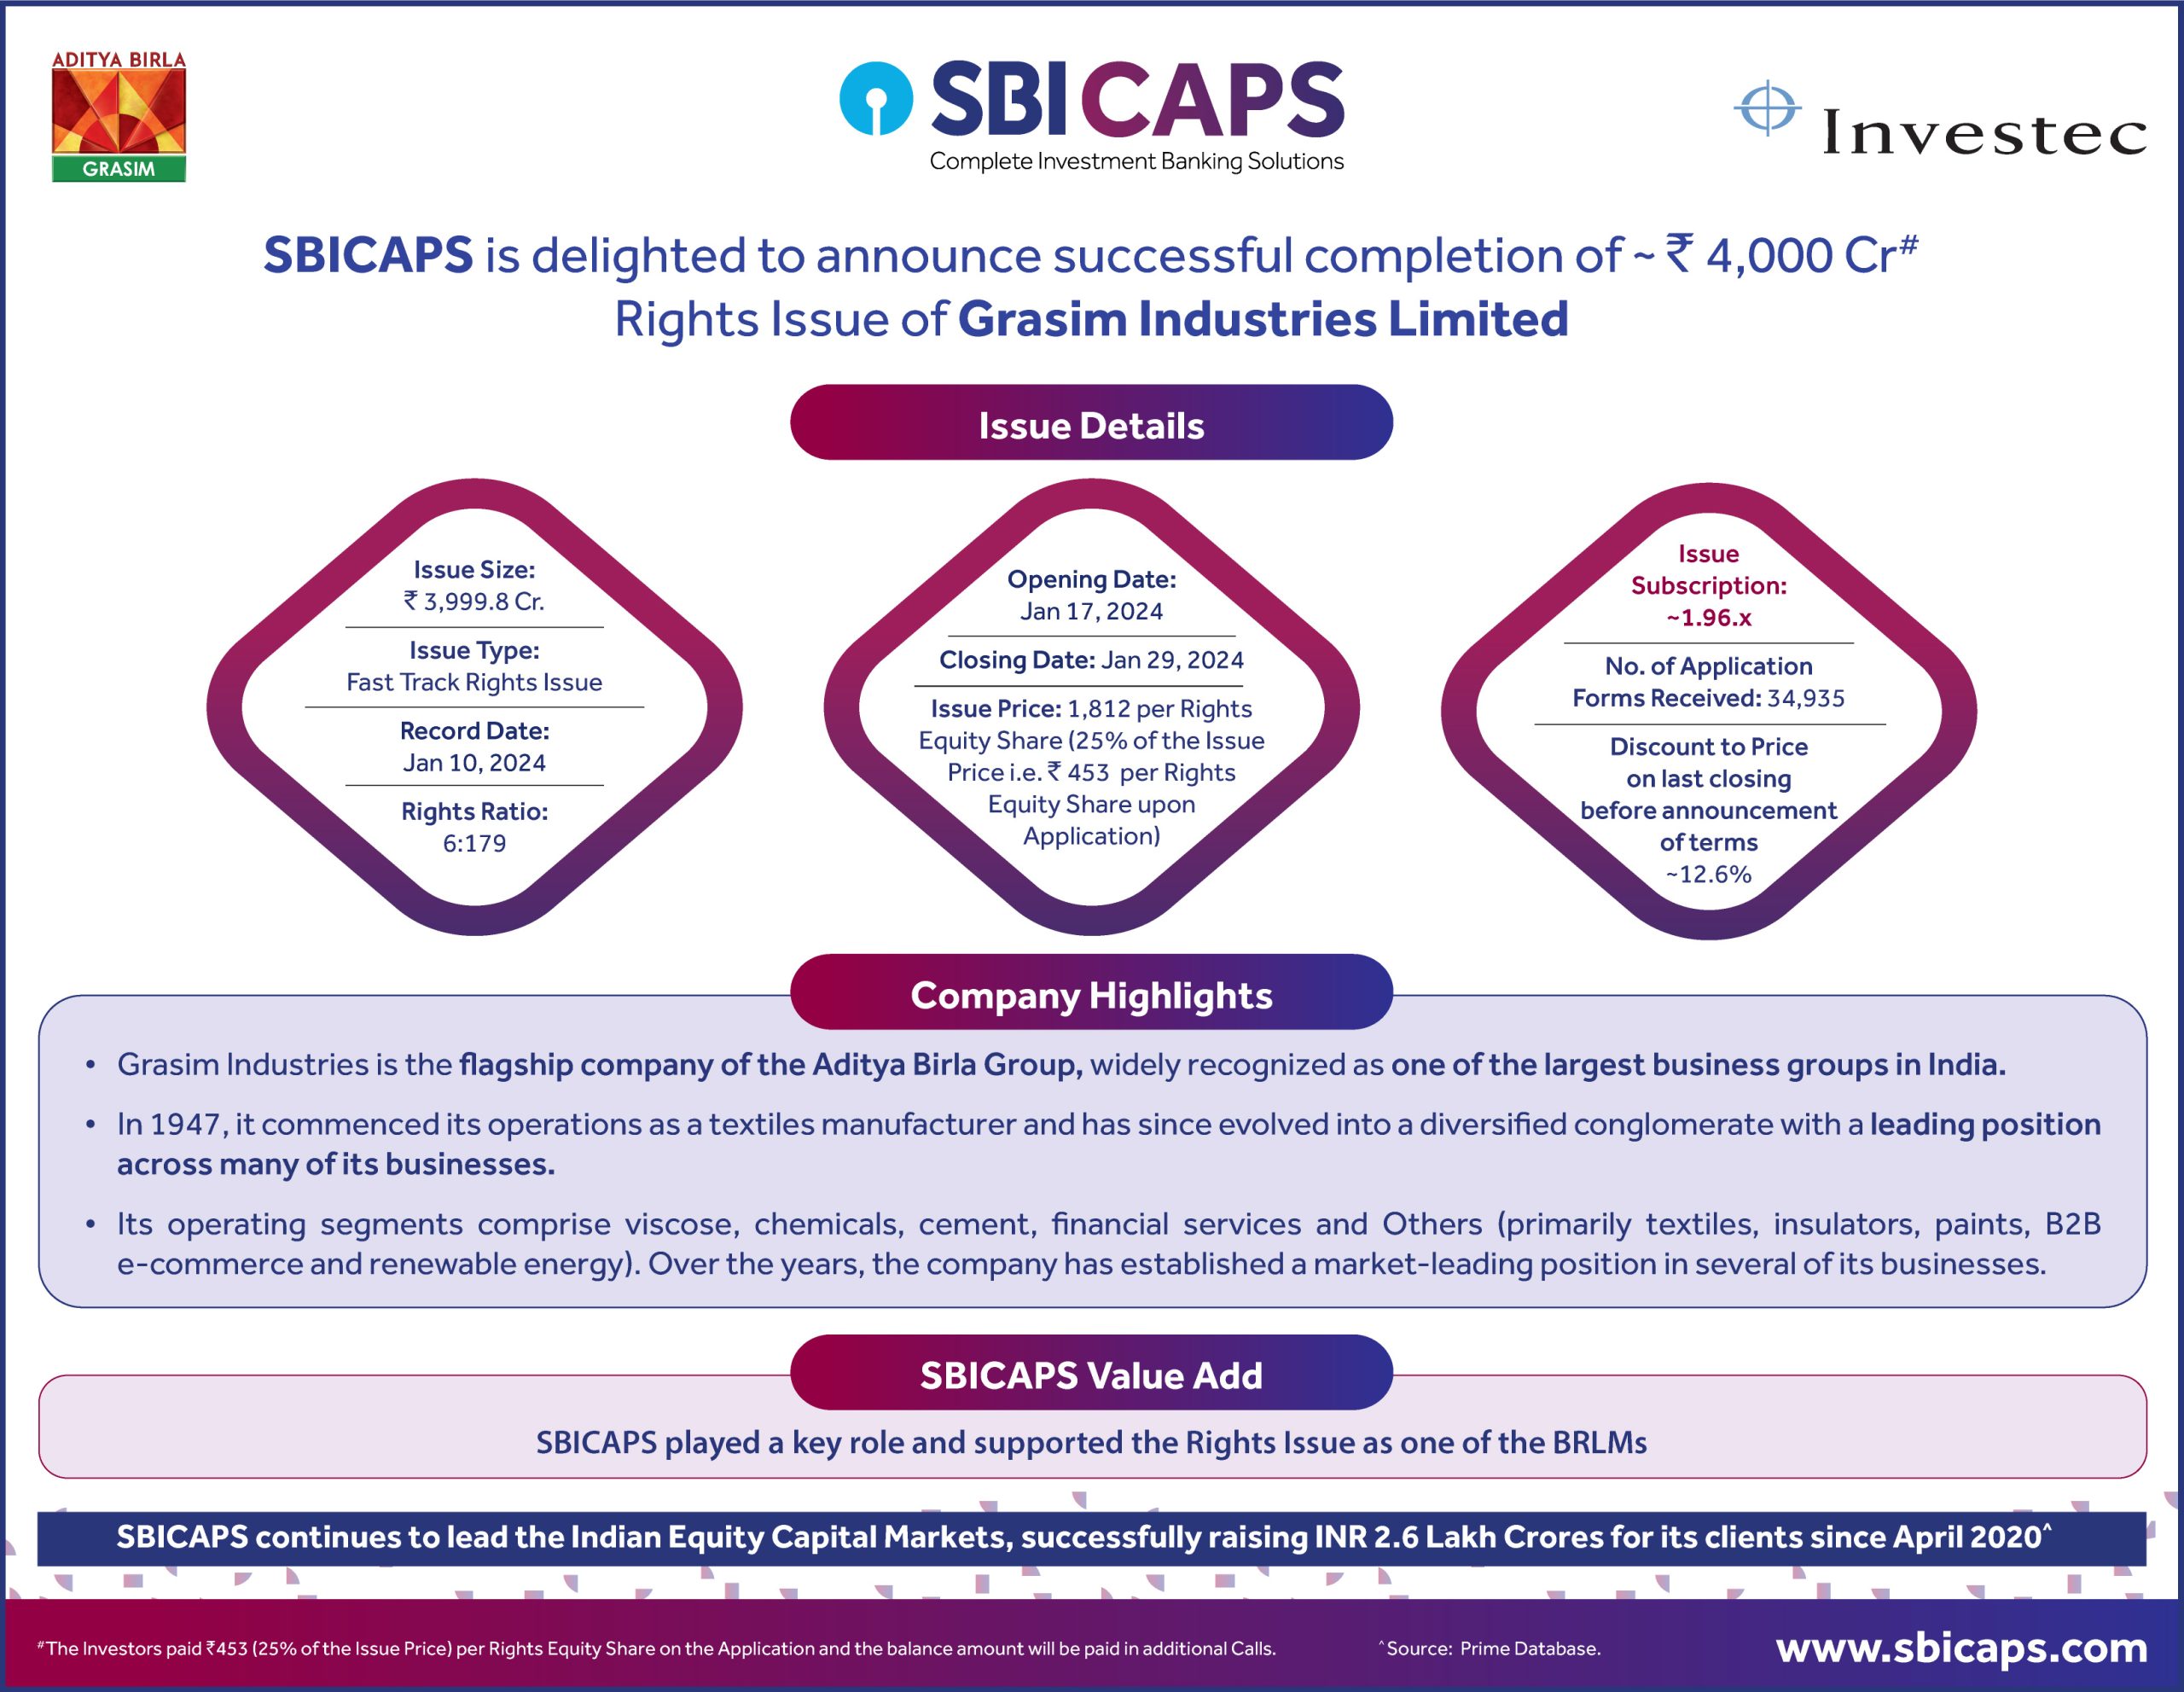 SBICAPS is delighted to announce successful completion of ₹4000 Cr Rights Issue of Grasim Industries Limited